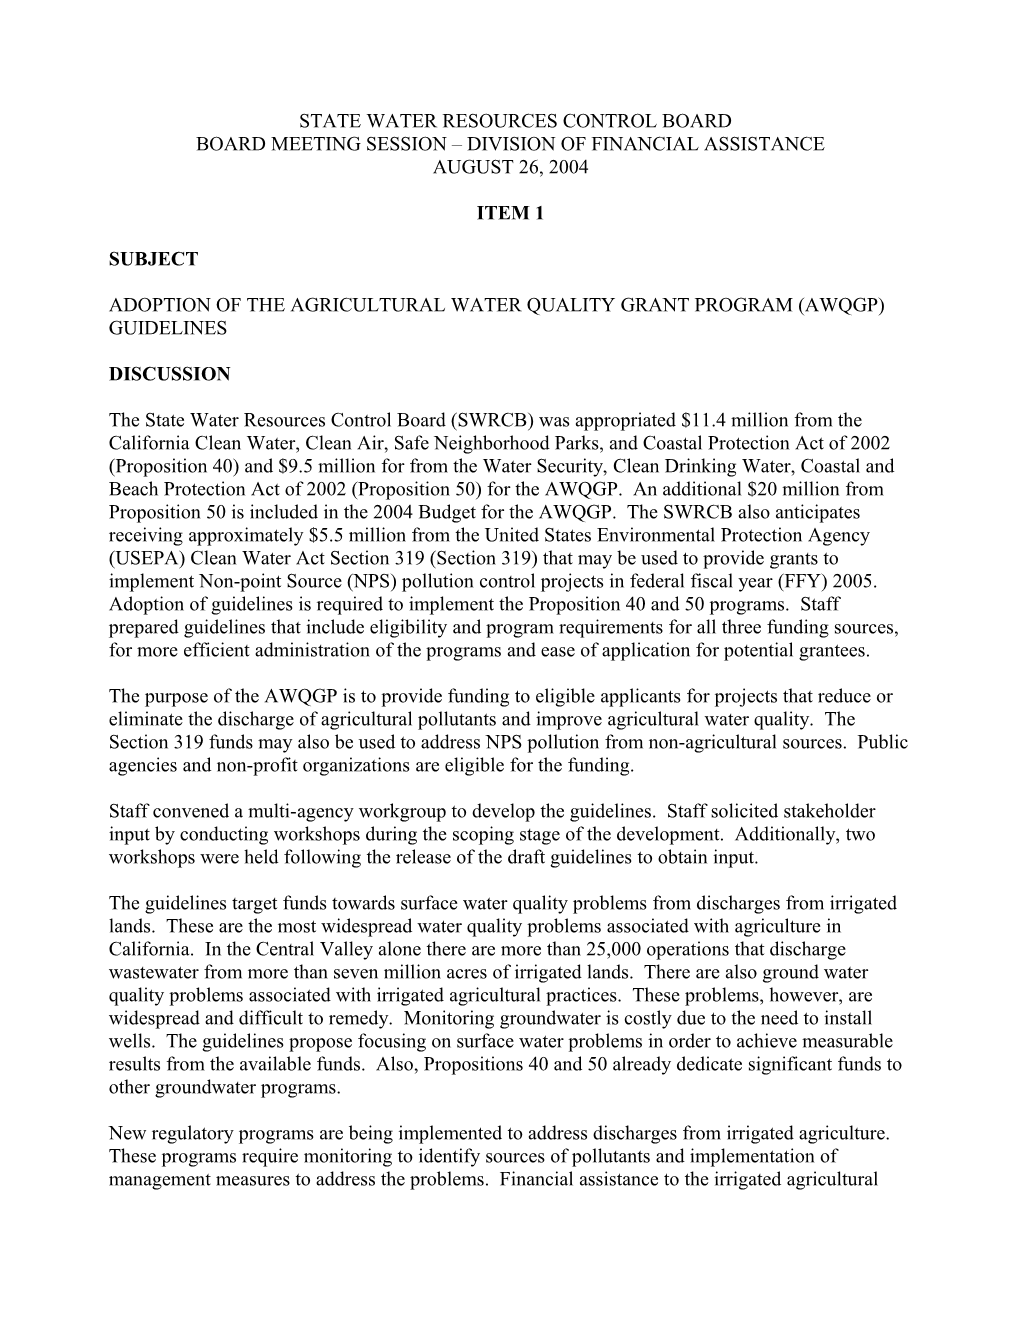 Agricultural Water Quality Grant Program Guidelines Agenda Item